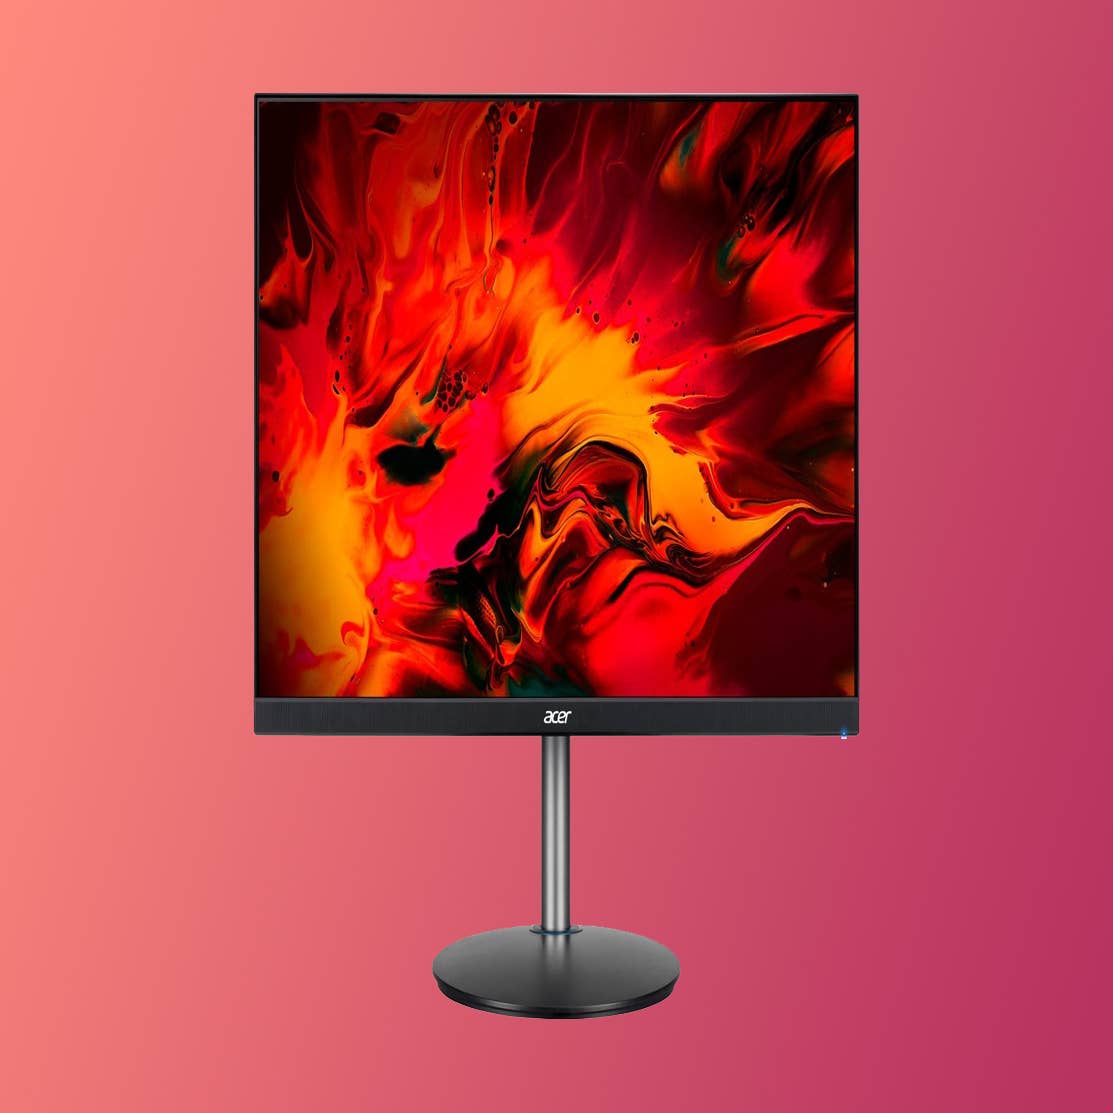 This 180Hz Acer gaming monitor is yours for $109.99